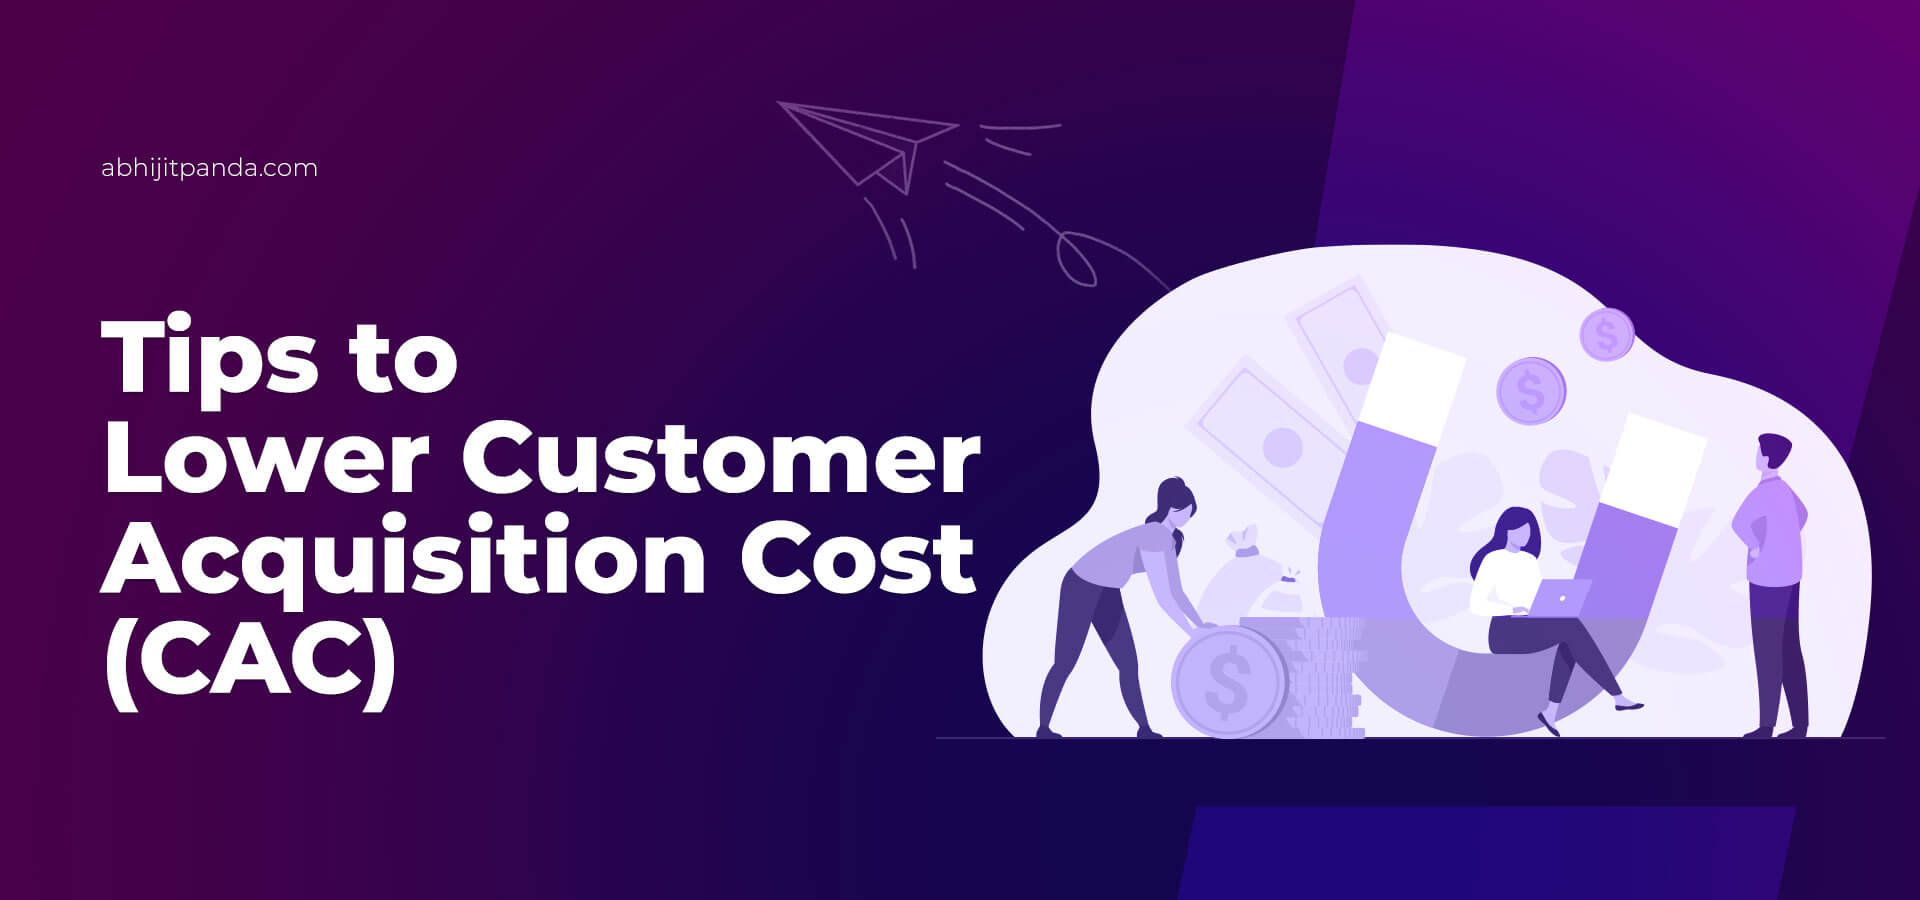 Tips to Lower Customer Acquisition Cost